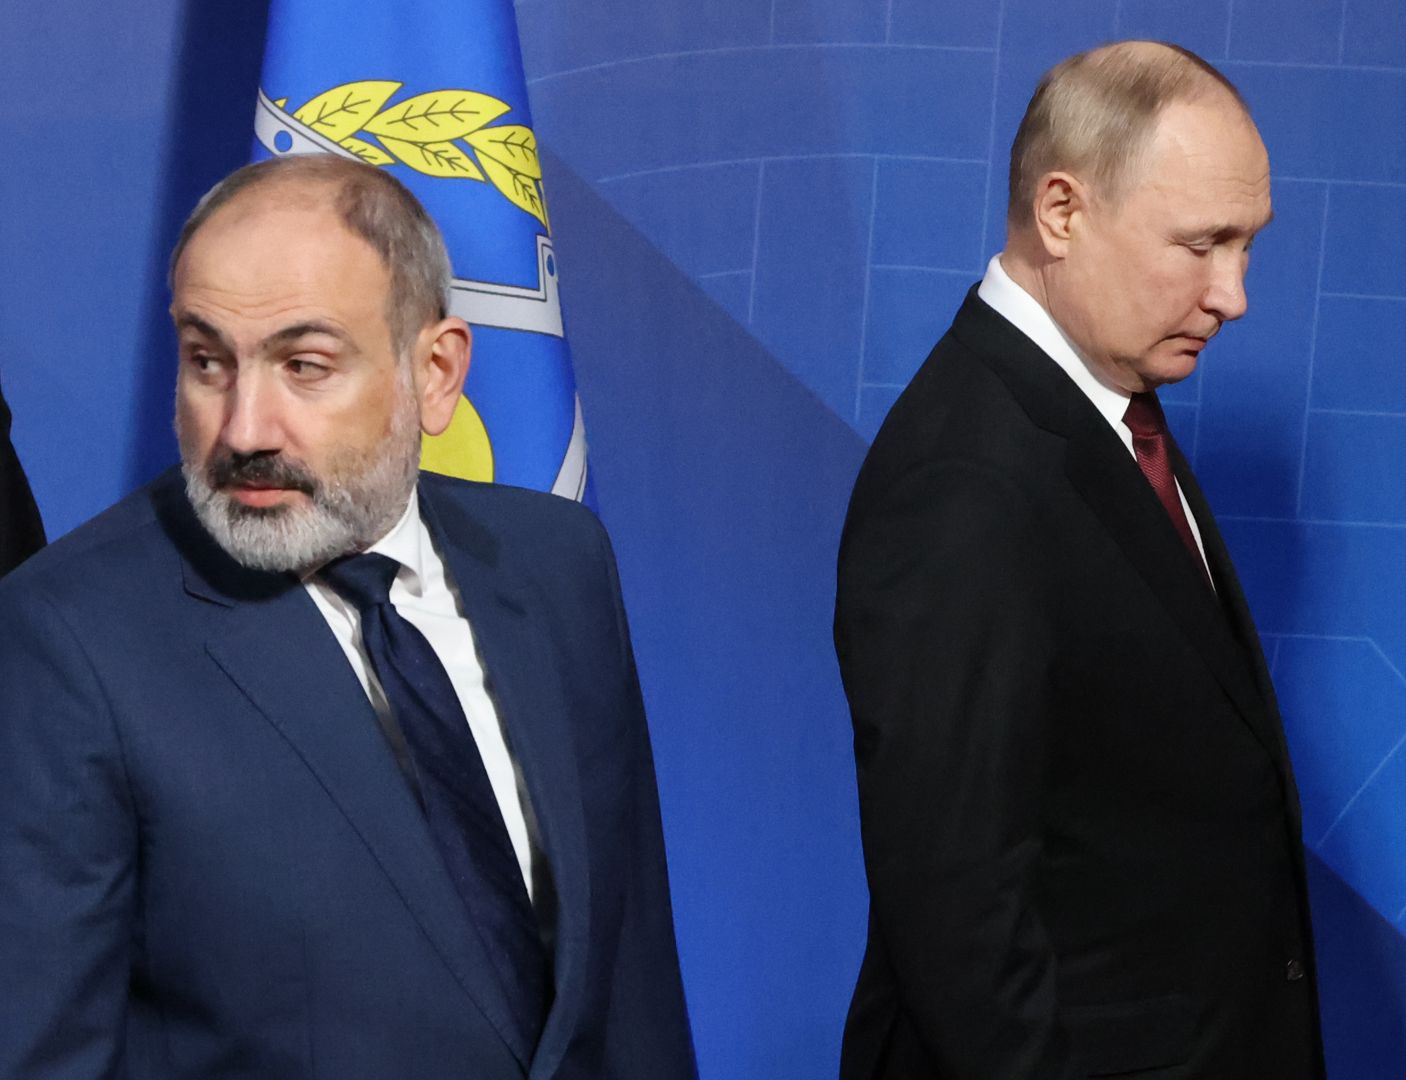 Will Armenia-Russia bromance ignite West? - expert comments on Pahinyan's phone talk with Putin